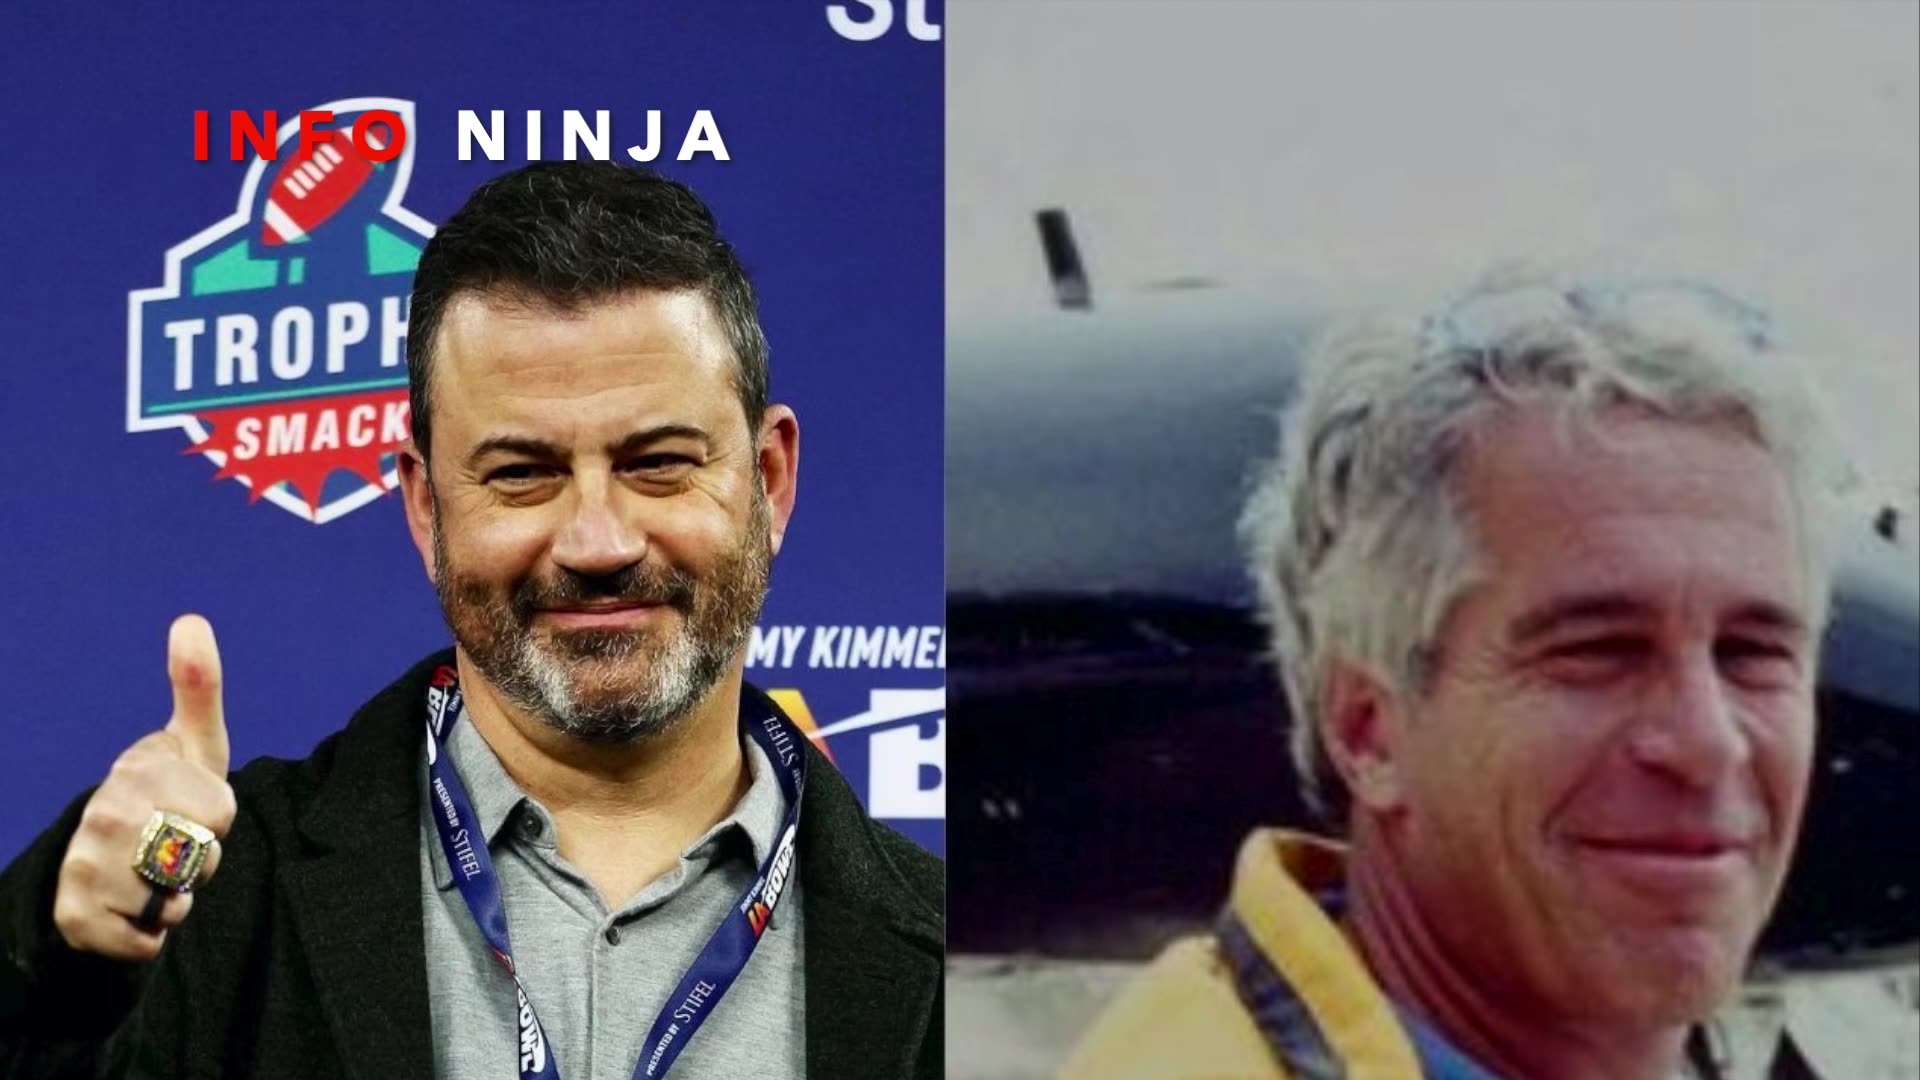 Jimmy Kimmel and Jeffrey Epstien Link Exposed!